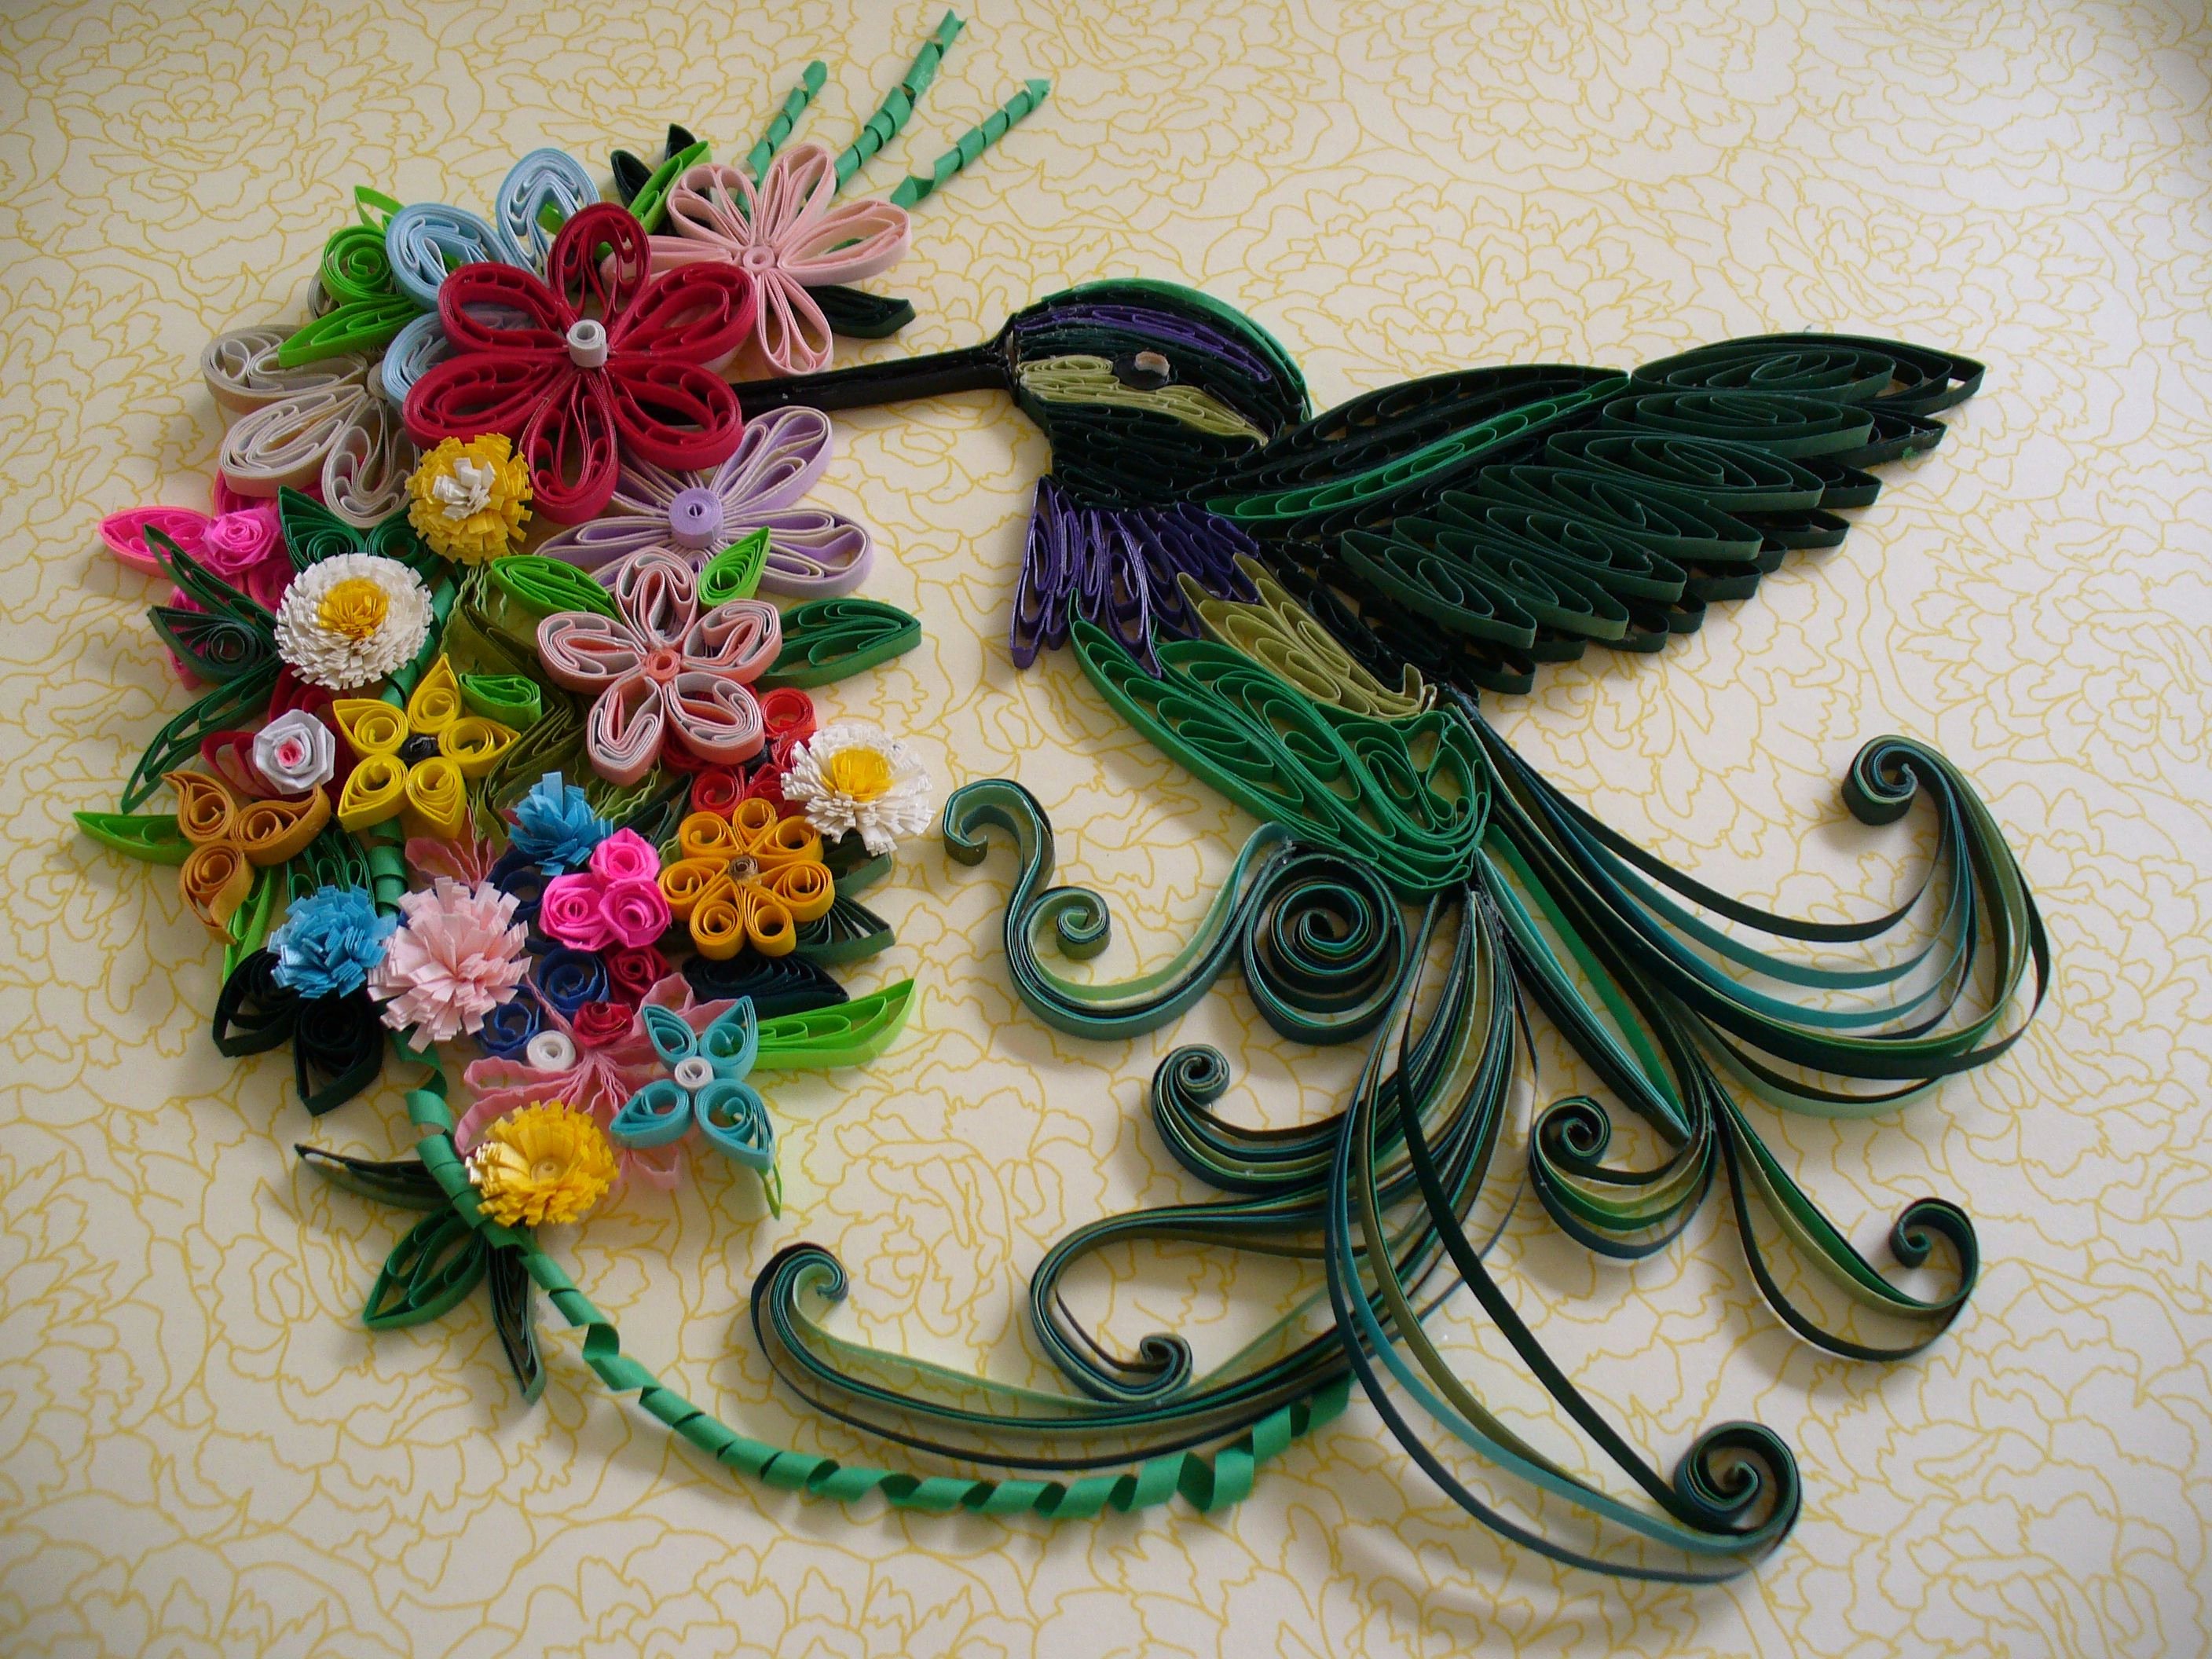 Paper Quilling Patterns Free Awesome Beautiful Quilled Hummingbird and Flower Arrangement by